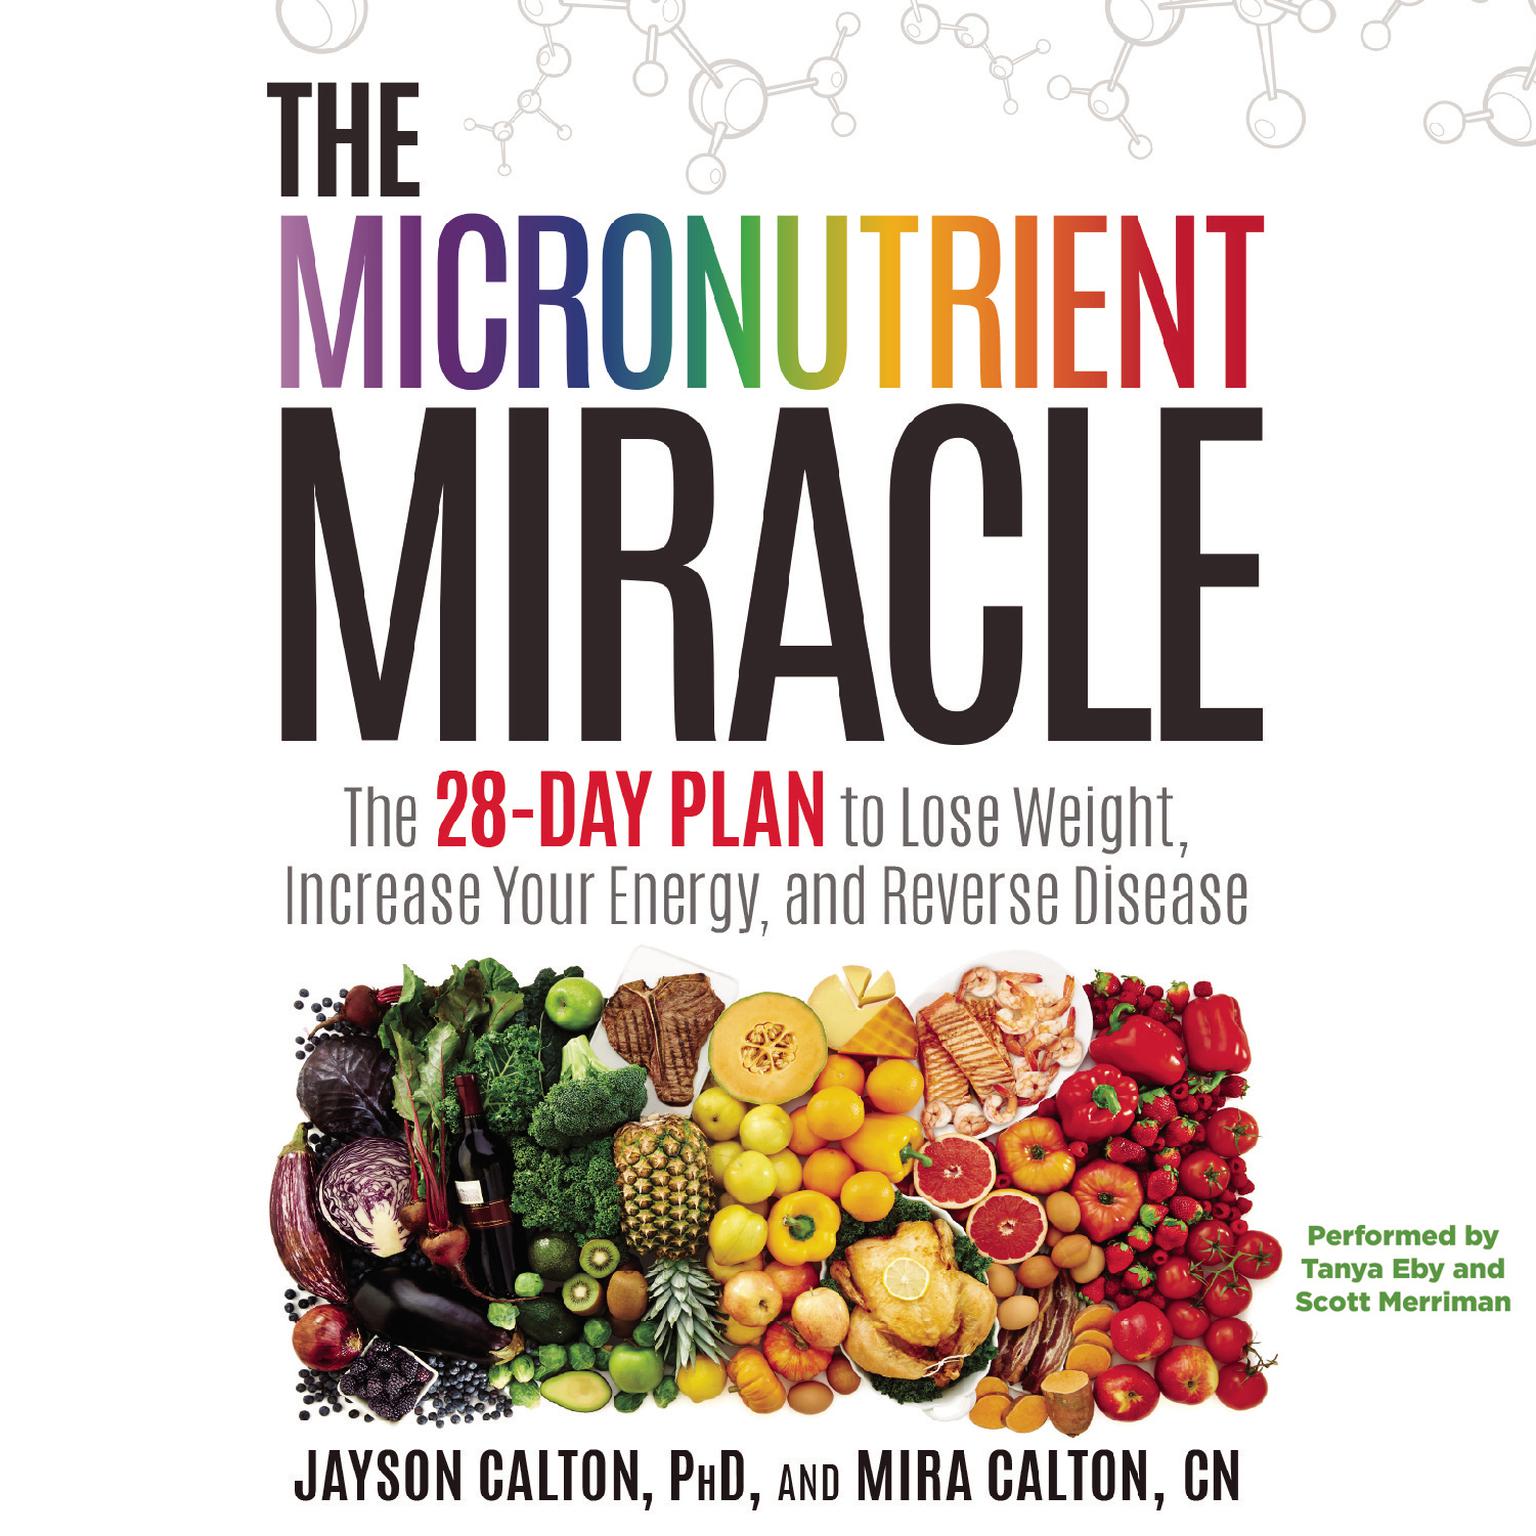 The Micronutrient Miracle: The 28-Day Plan to Lose Weight, Increase Your Energy, and Reverse Disease Audiobook, by Jayson Calton